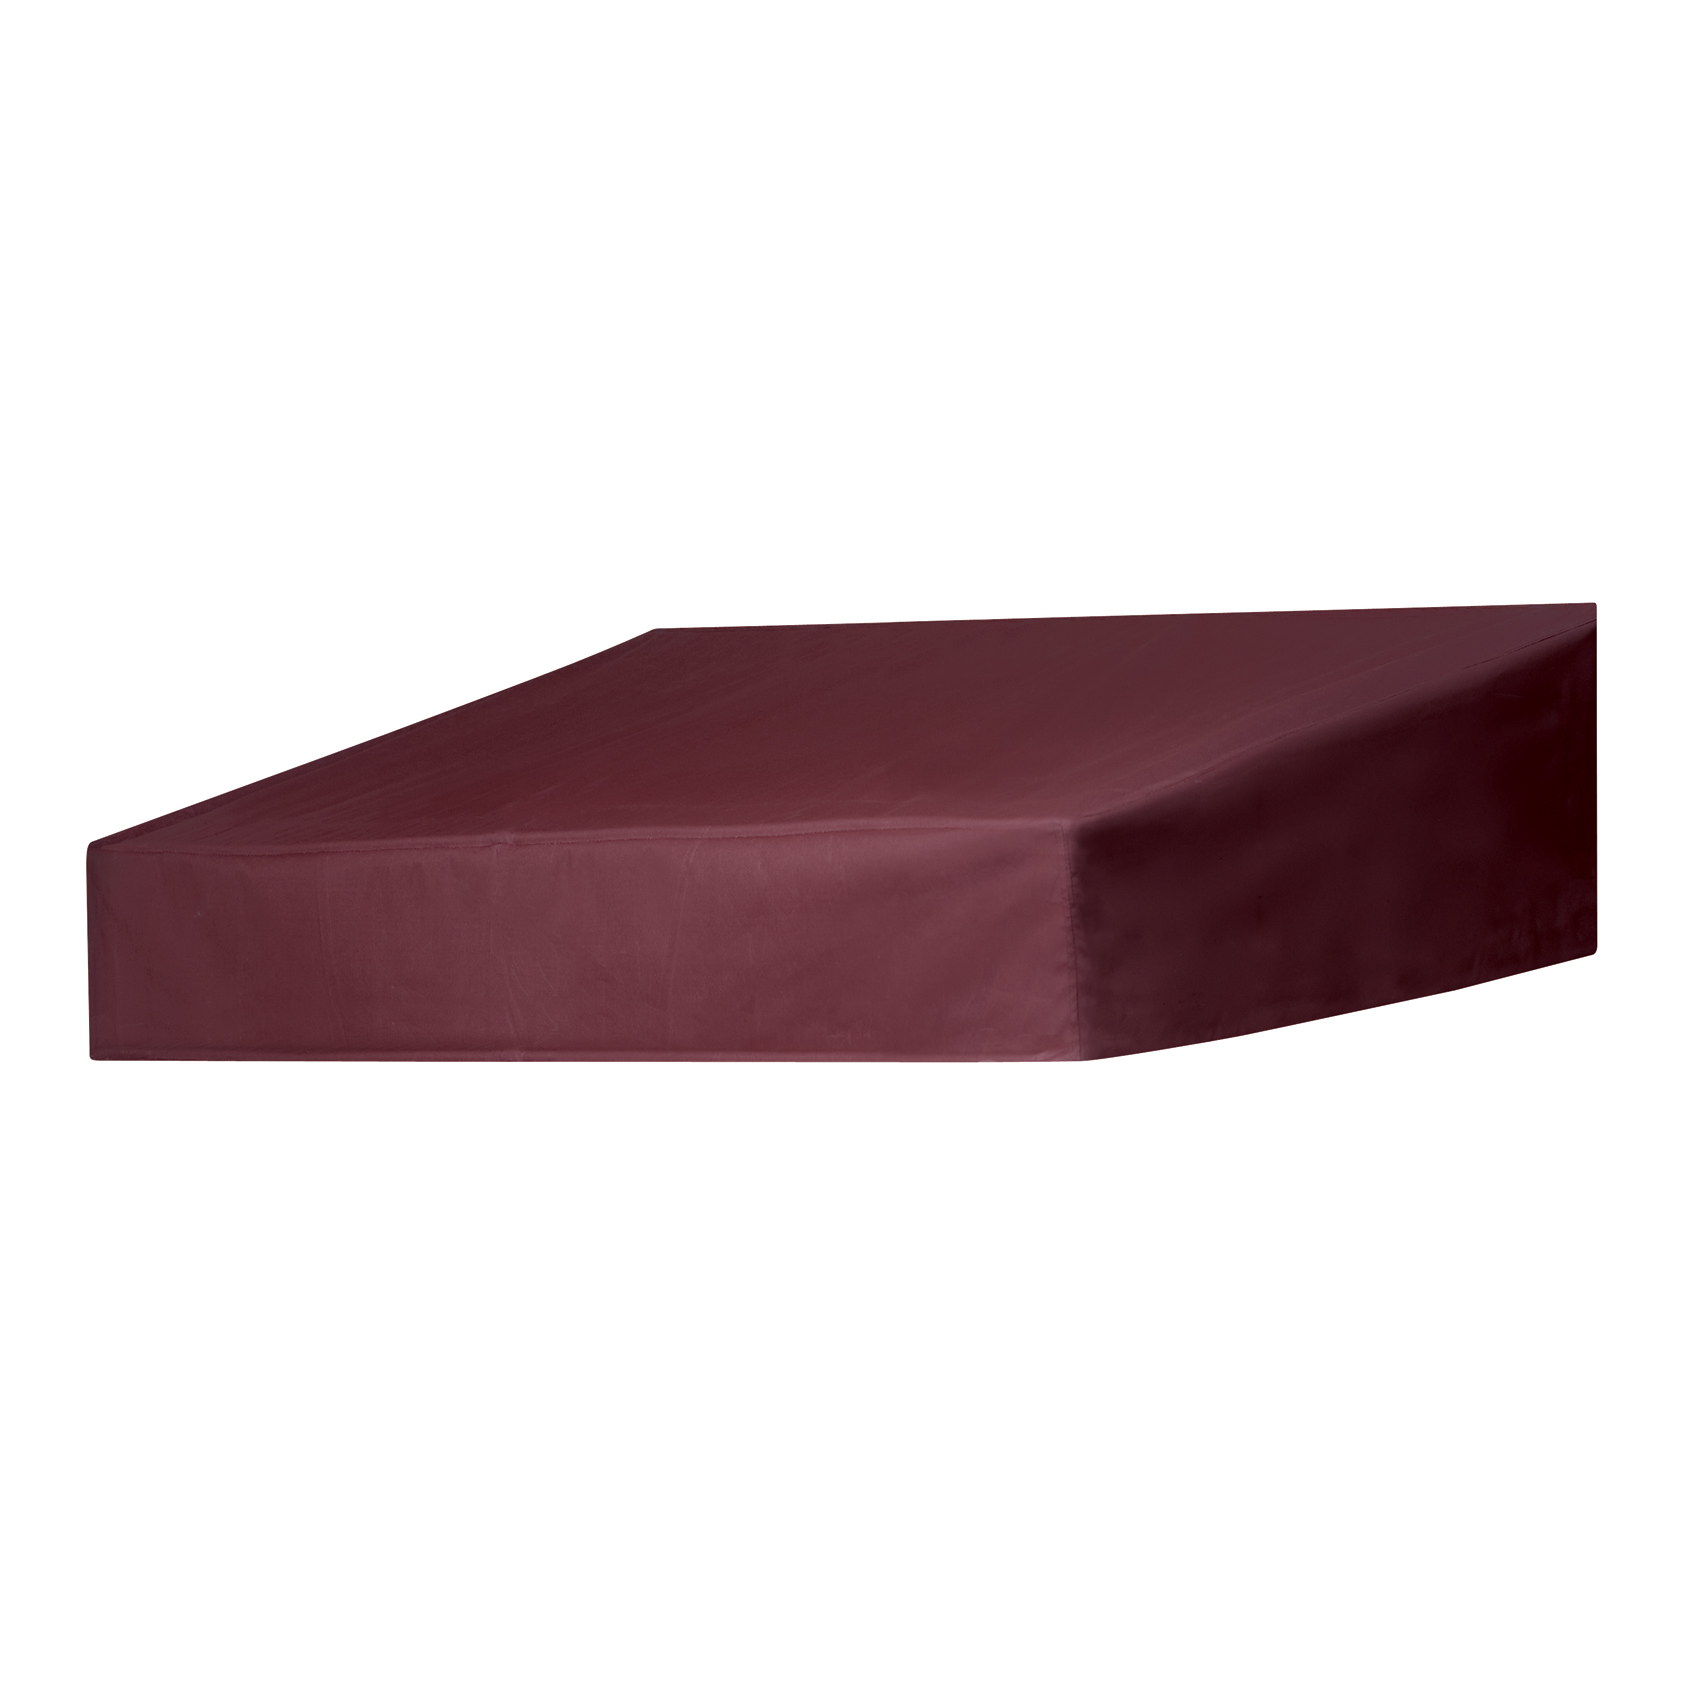 Door Canopy in a Box&reg; 8' Classic Style Door Canopy Replacement Cover in Assorted Colors